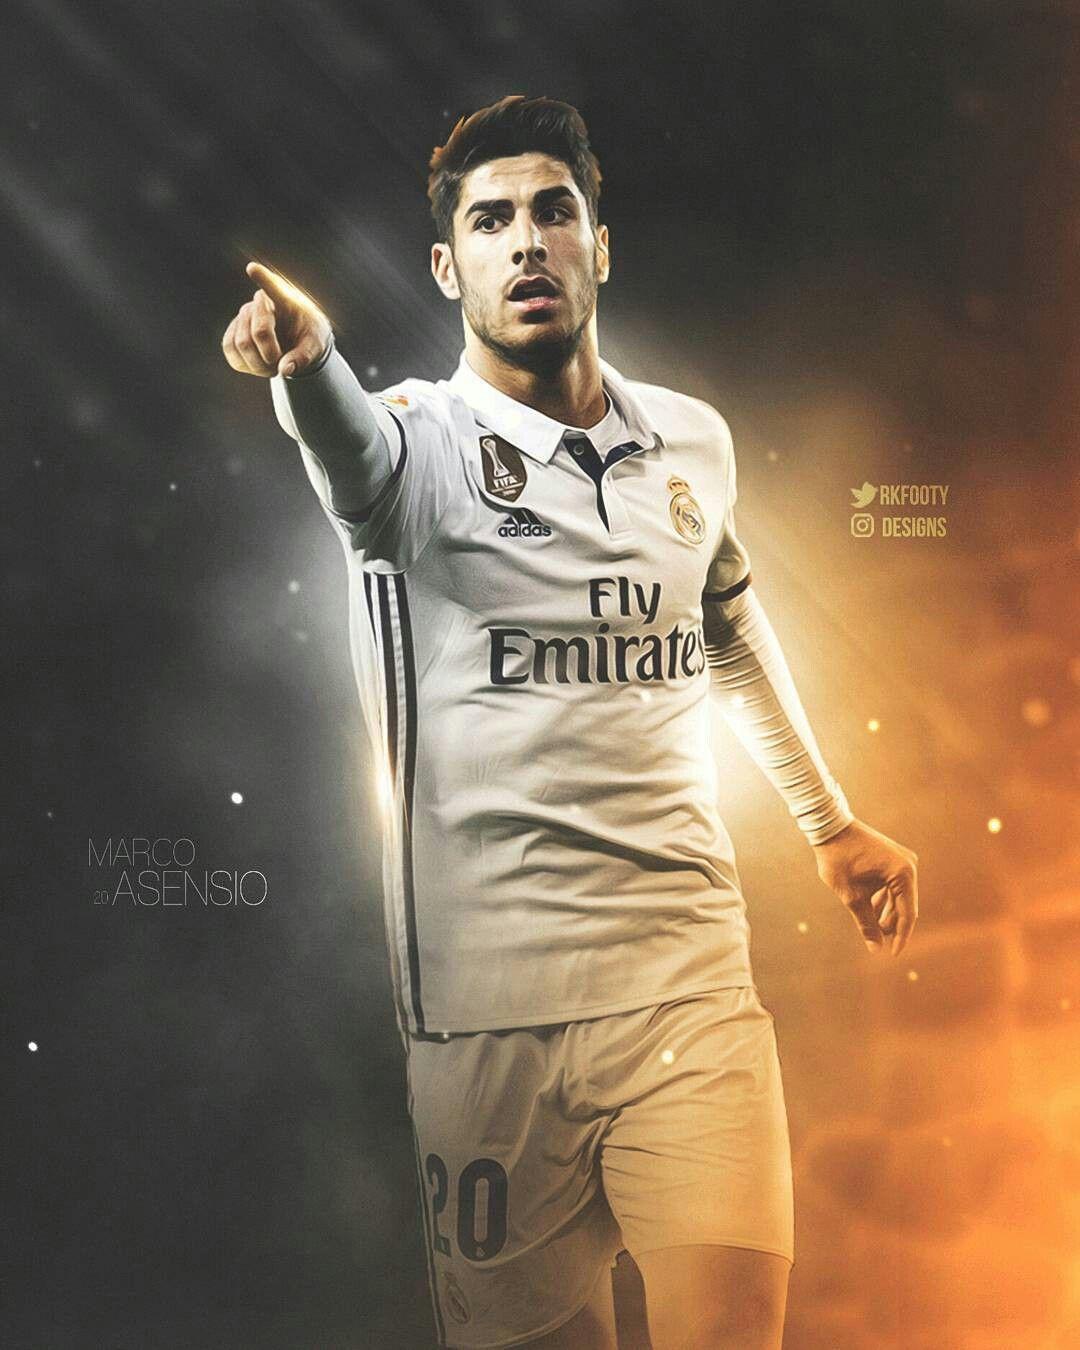 Marco Asensio 2018 Wallpapers - Wallpaper Cave